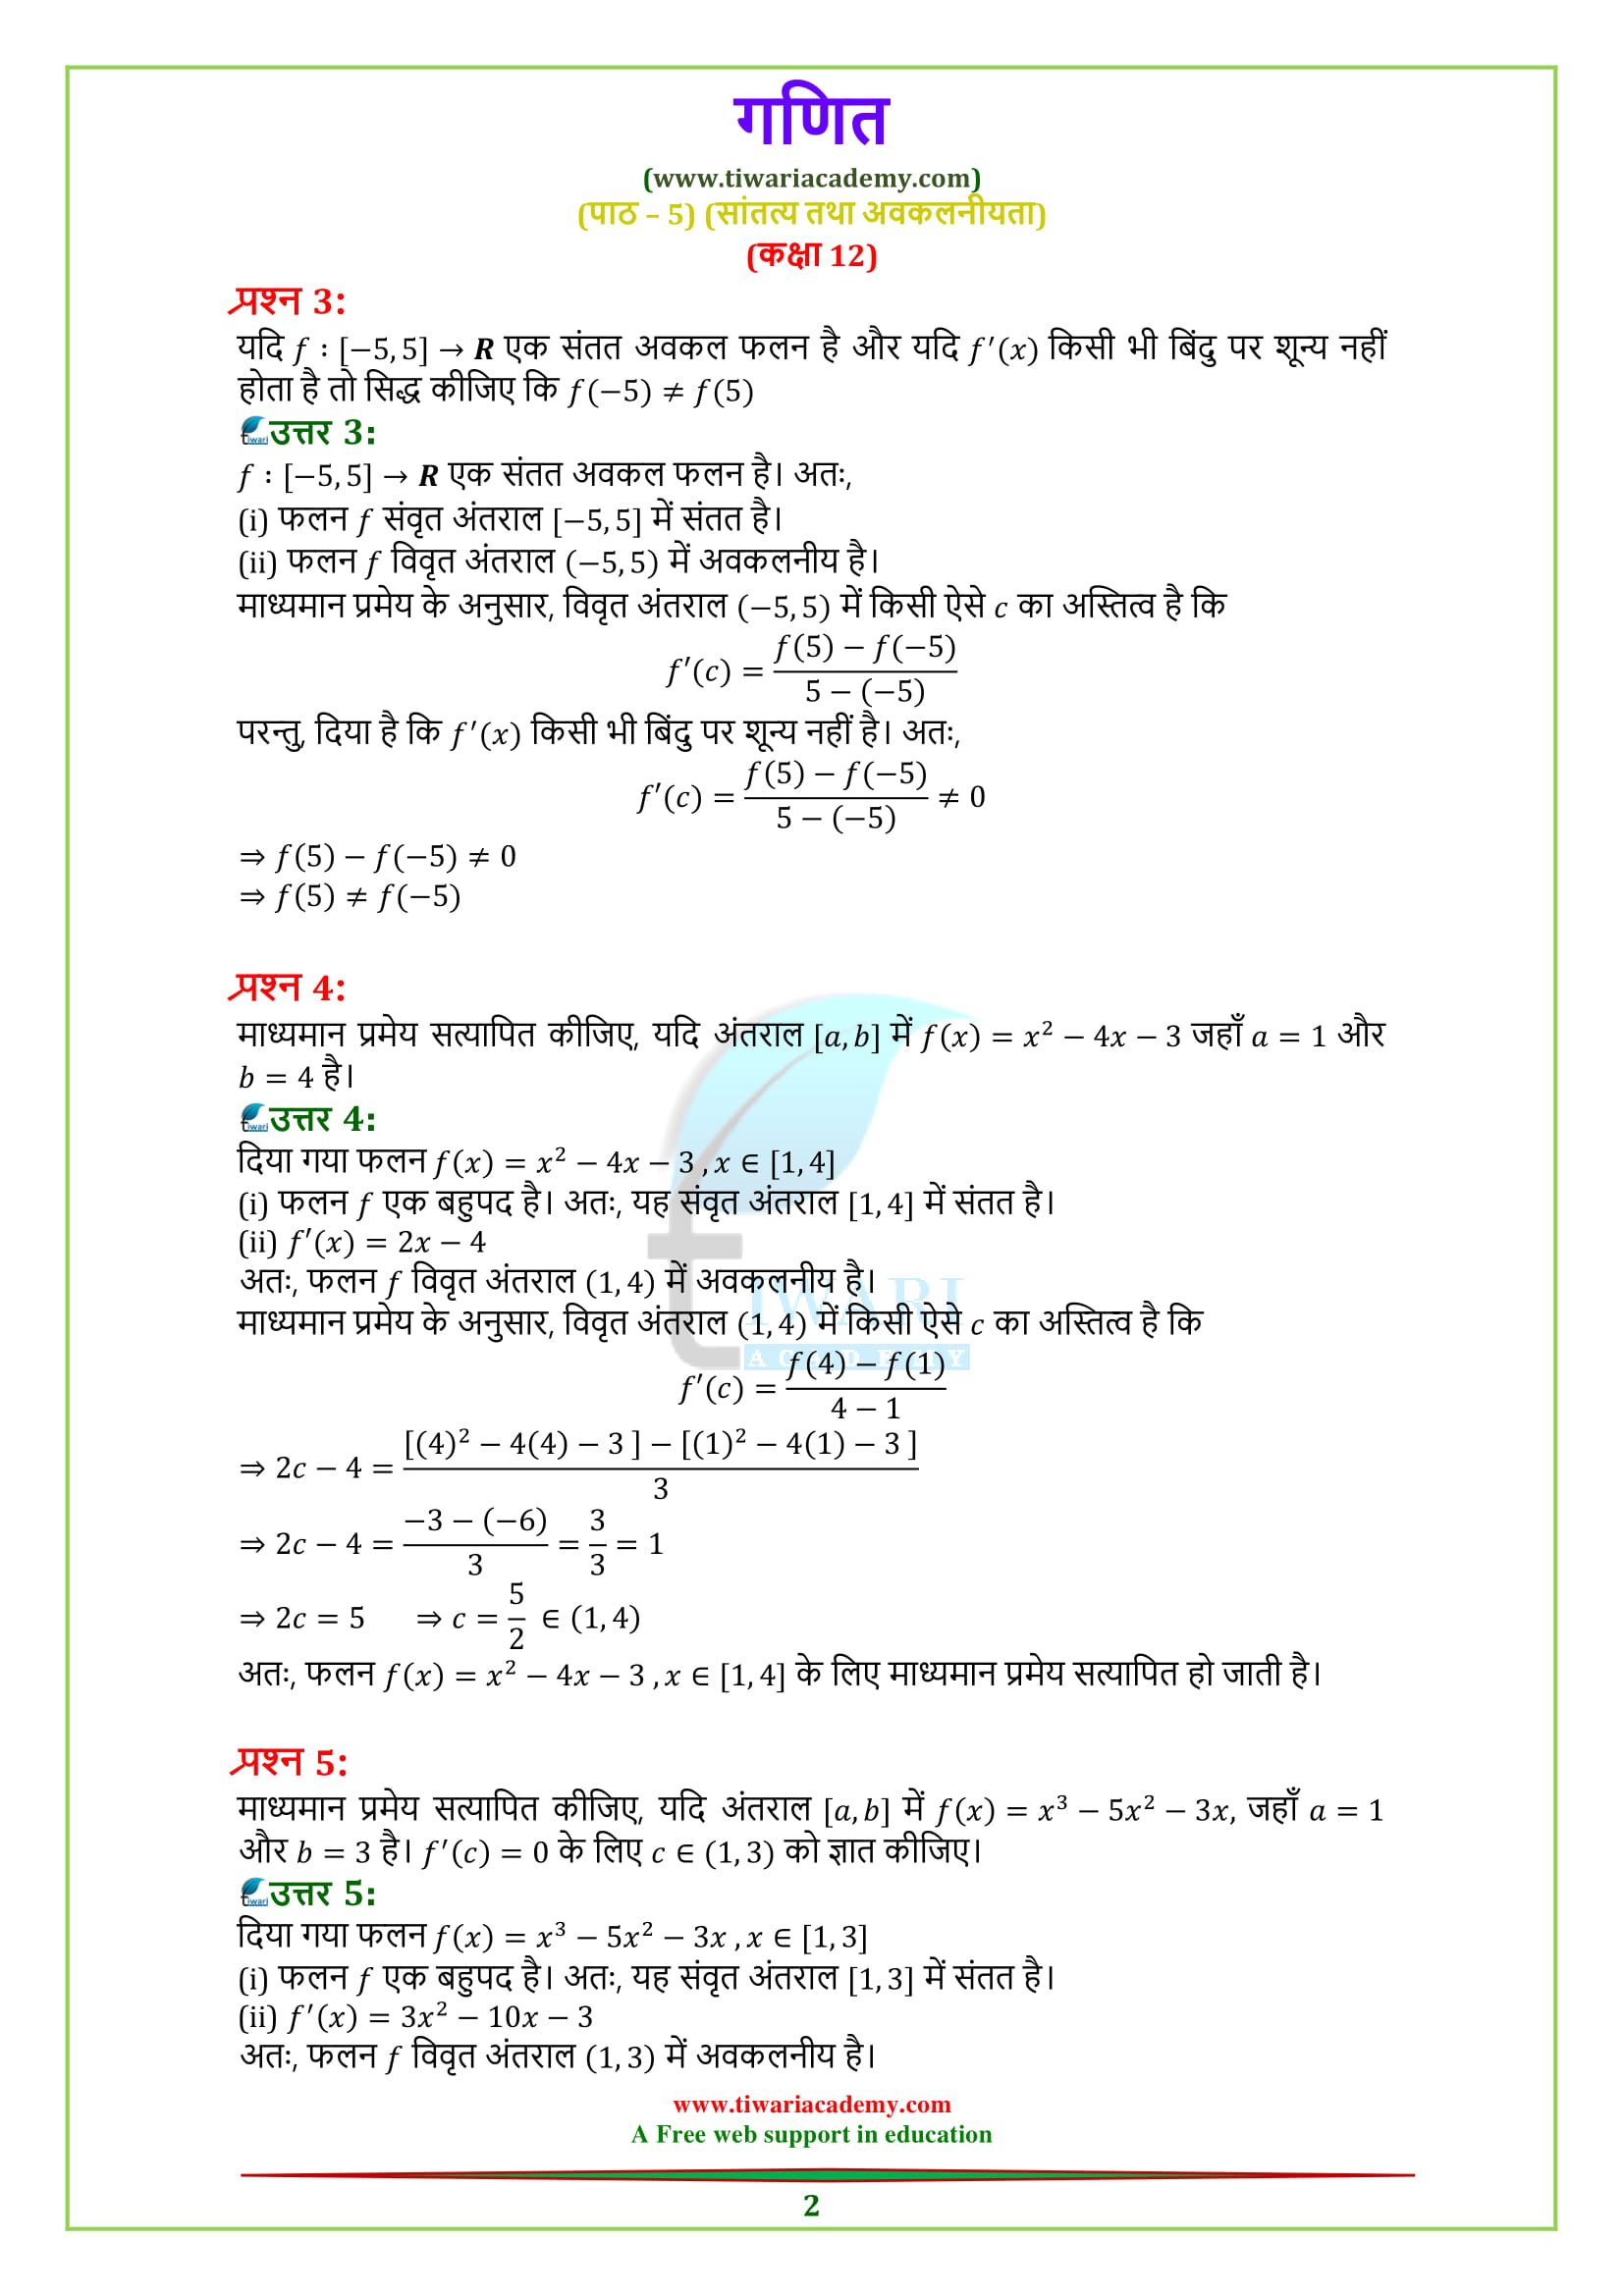 12 Maths Chapter 5 Exercise 5.8 solutions for CBSE and UP Board 2018-19